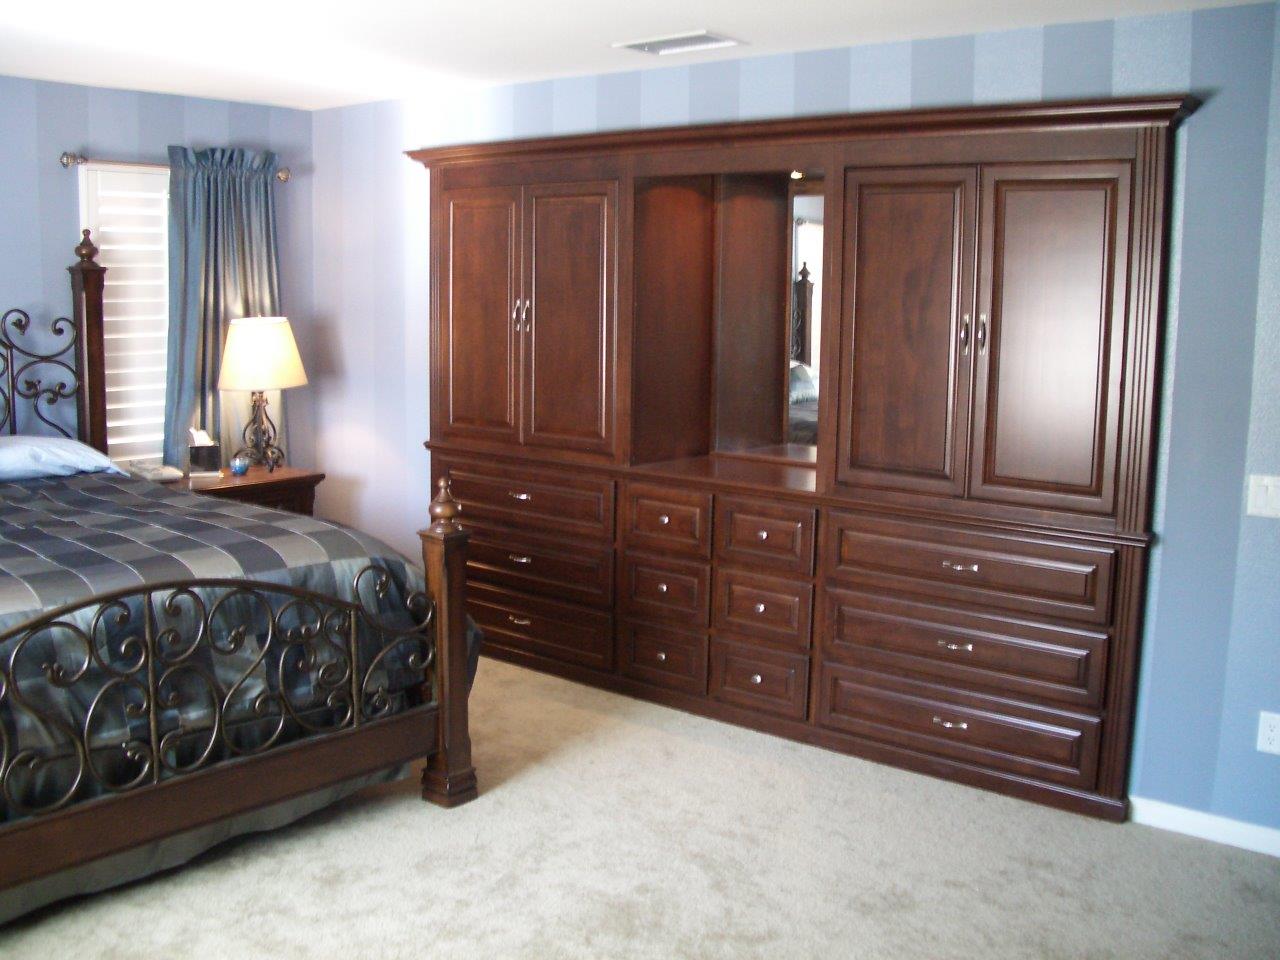 Murphy Beds and Bedroom Cabinets - Woodwork Creations